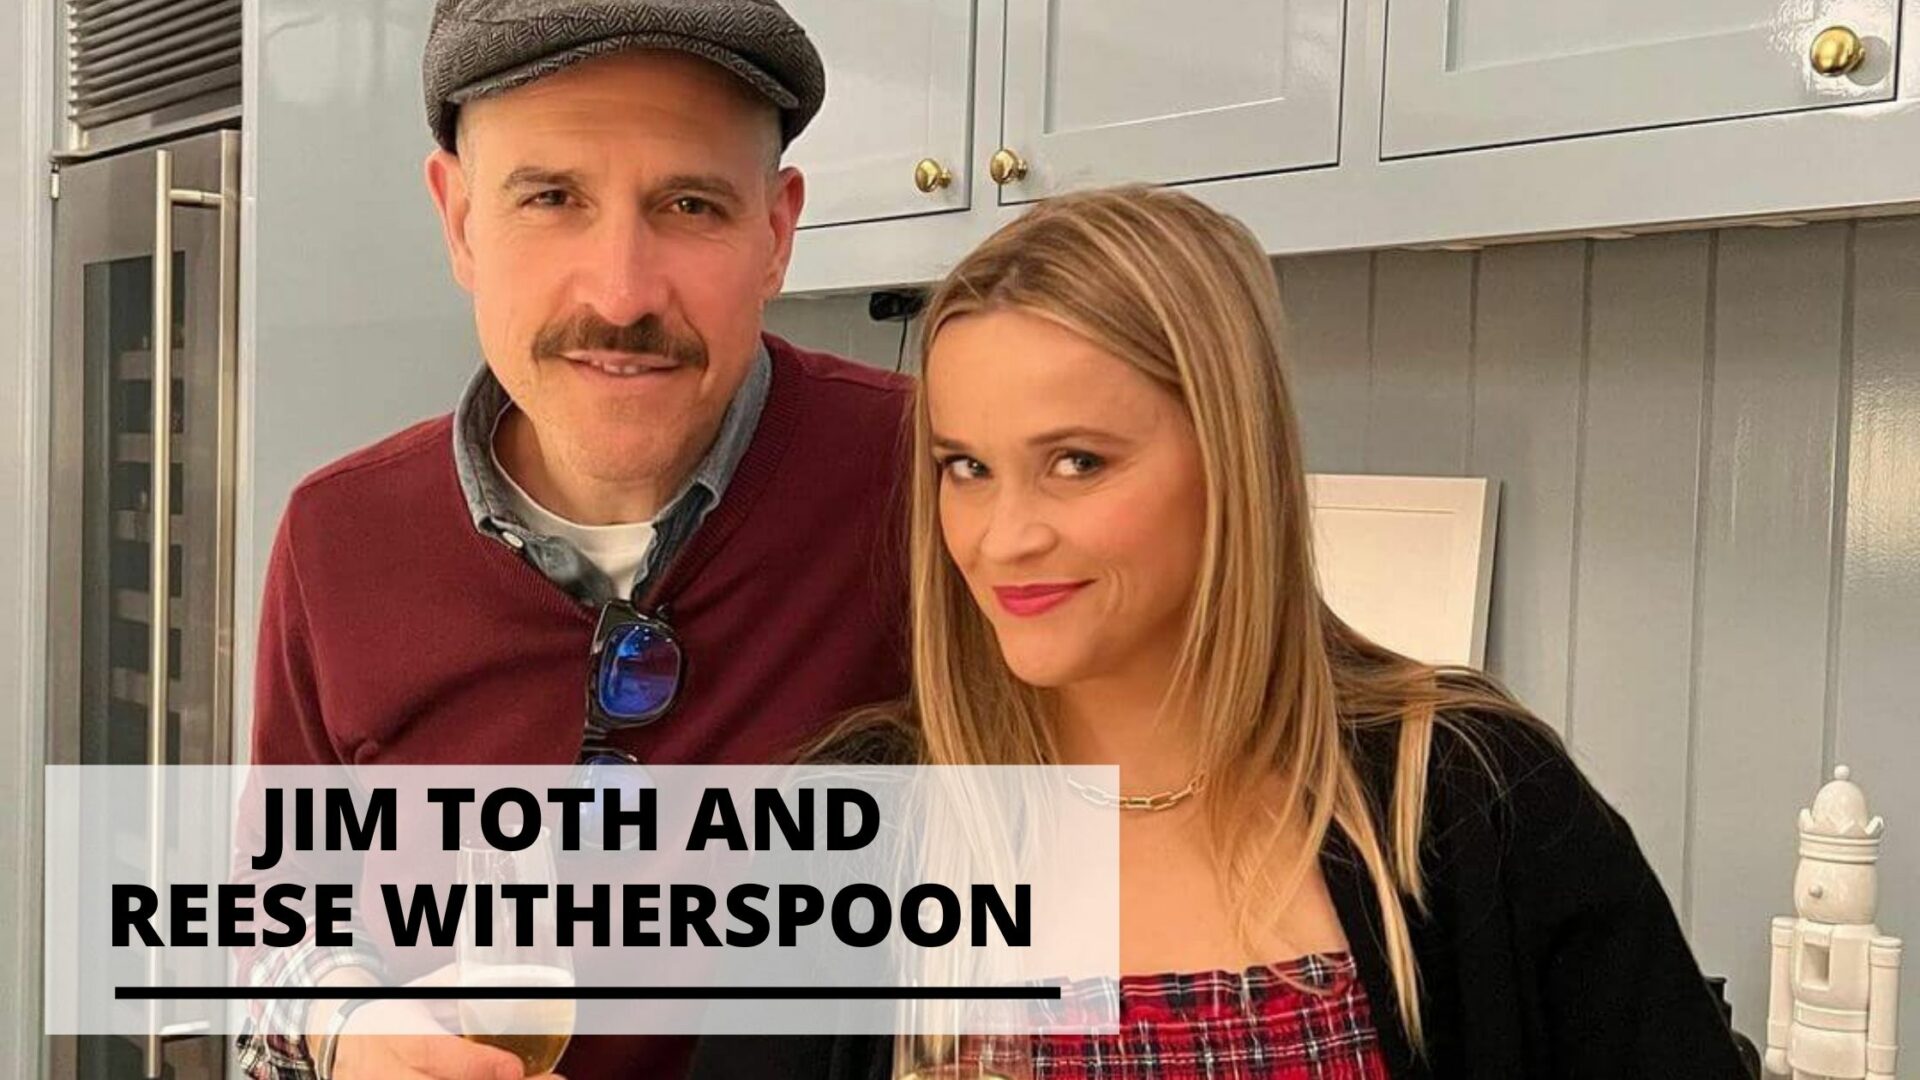 Best Pics of Jim Toth and Reese Witherspoon